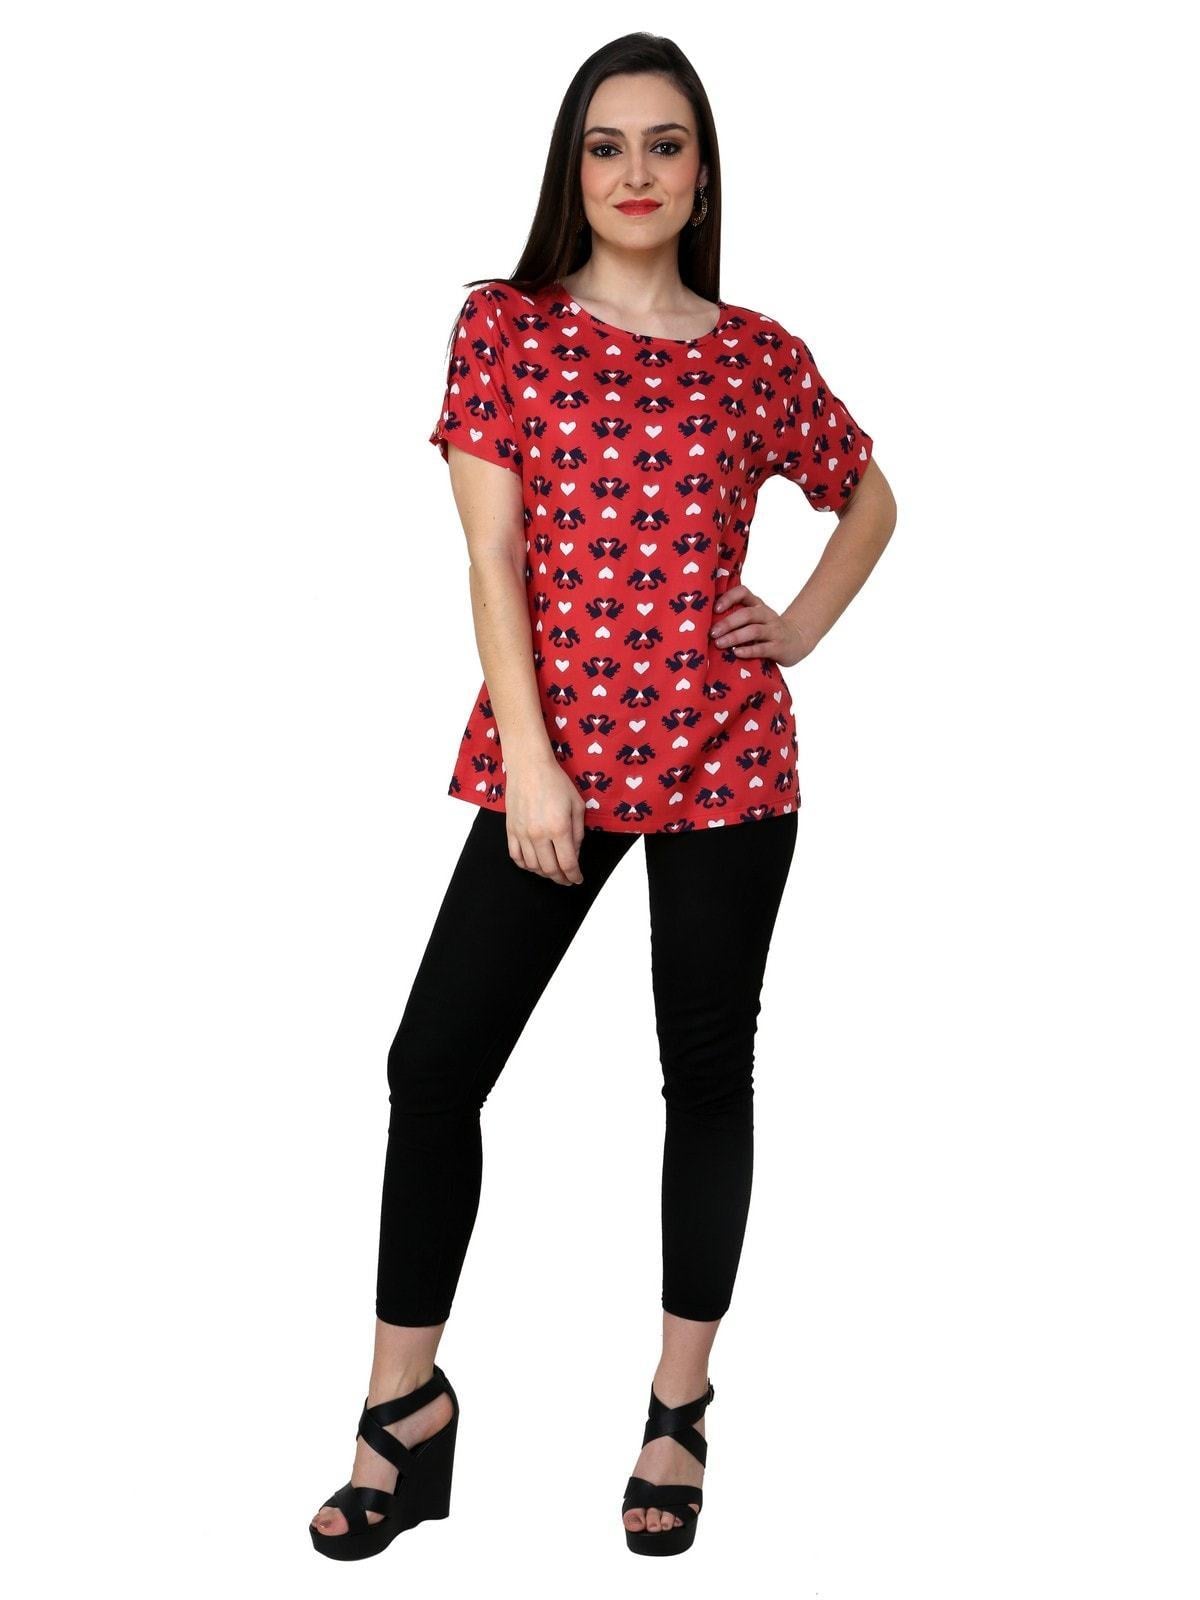 Women's Coral Printed Top - Pannkh